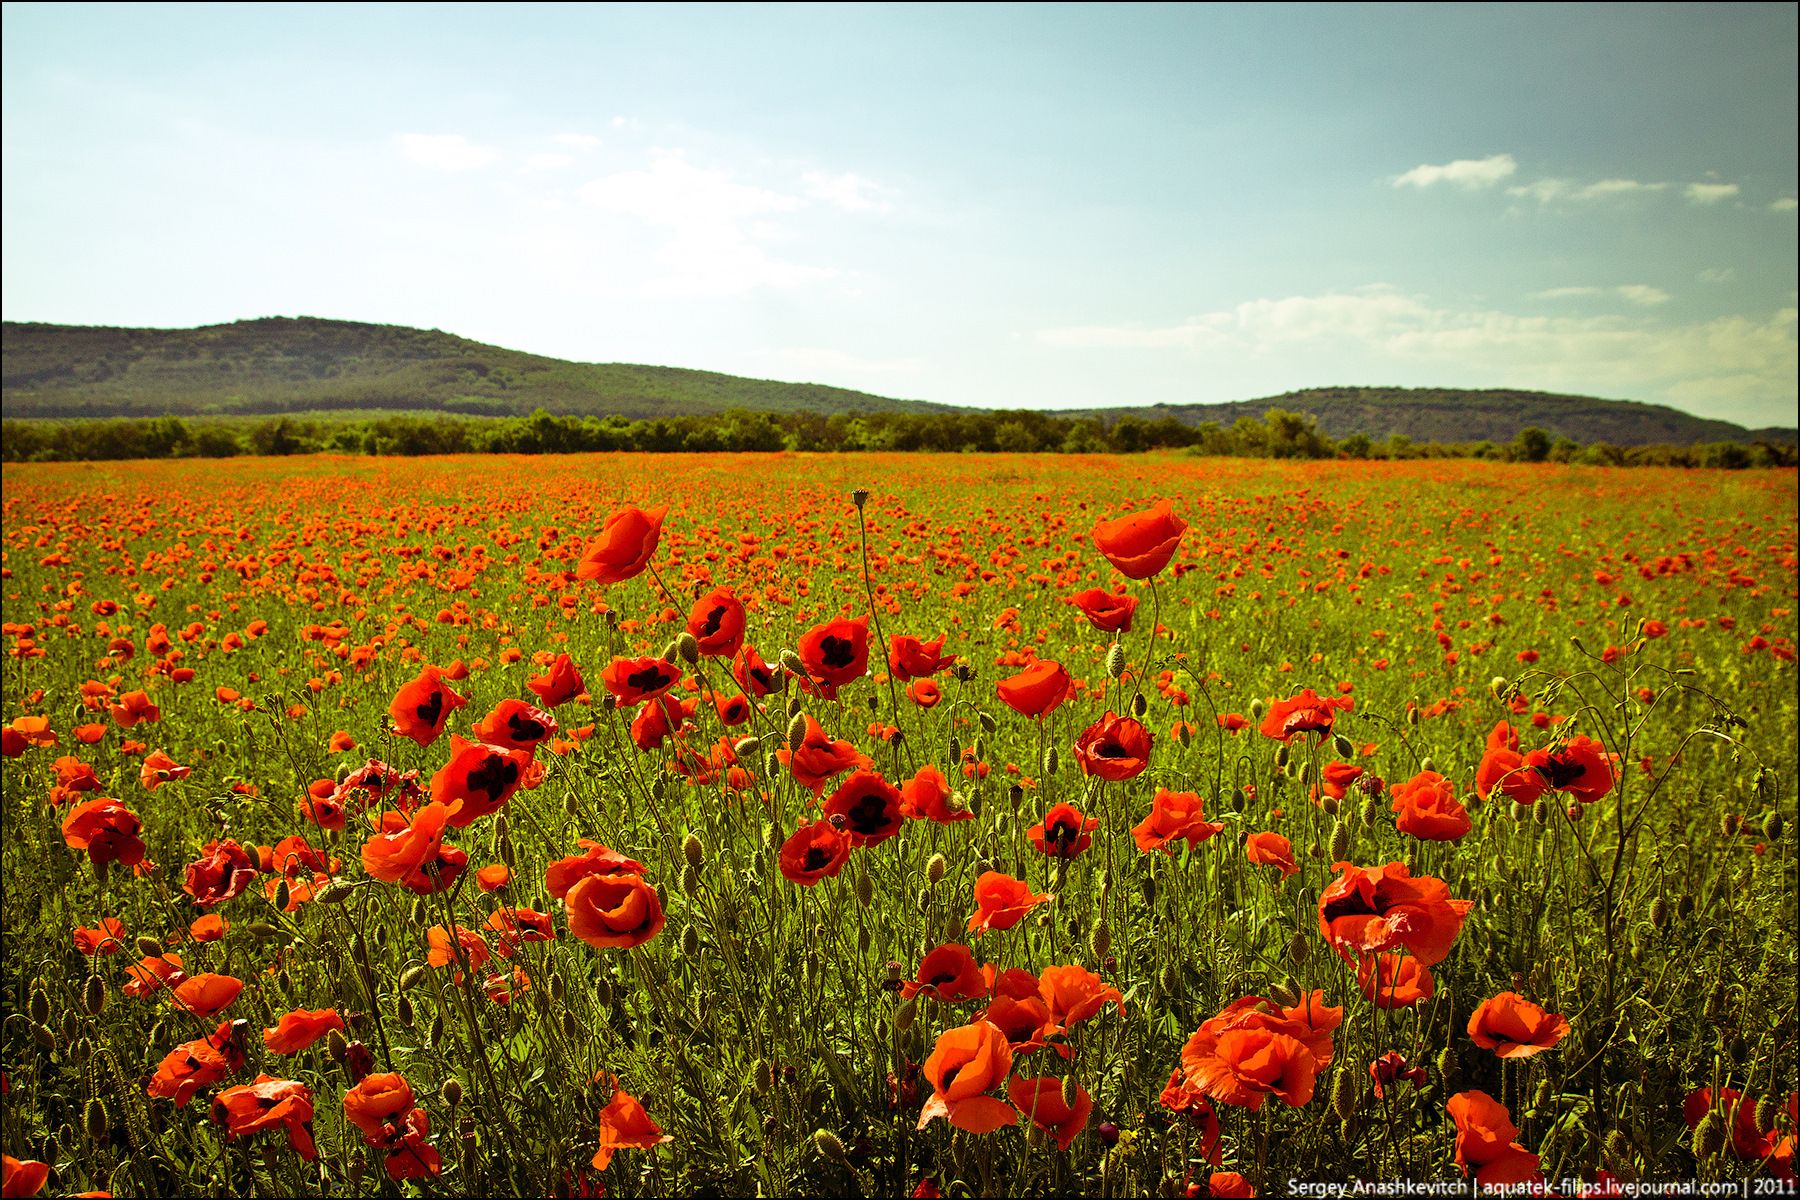 General 1800x1200 nature field landscape poppies watermarked sunlight 2011 (Year) clouds sky flowers hills